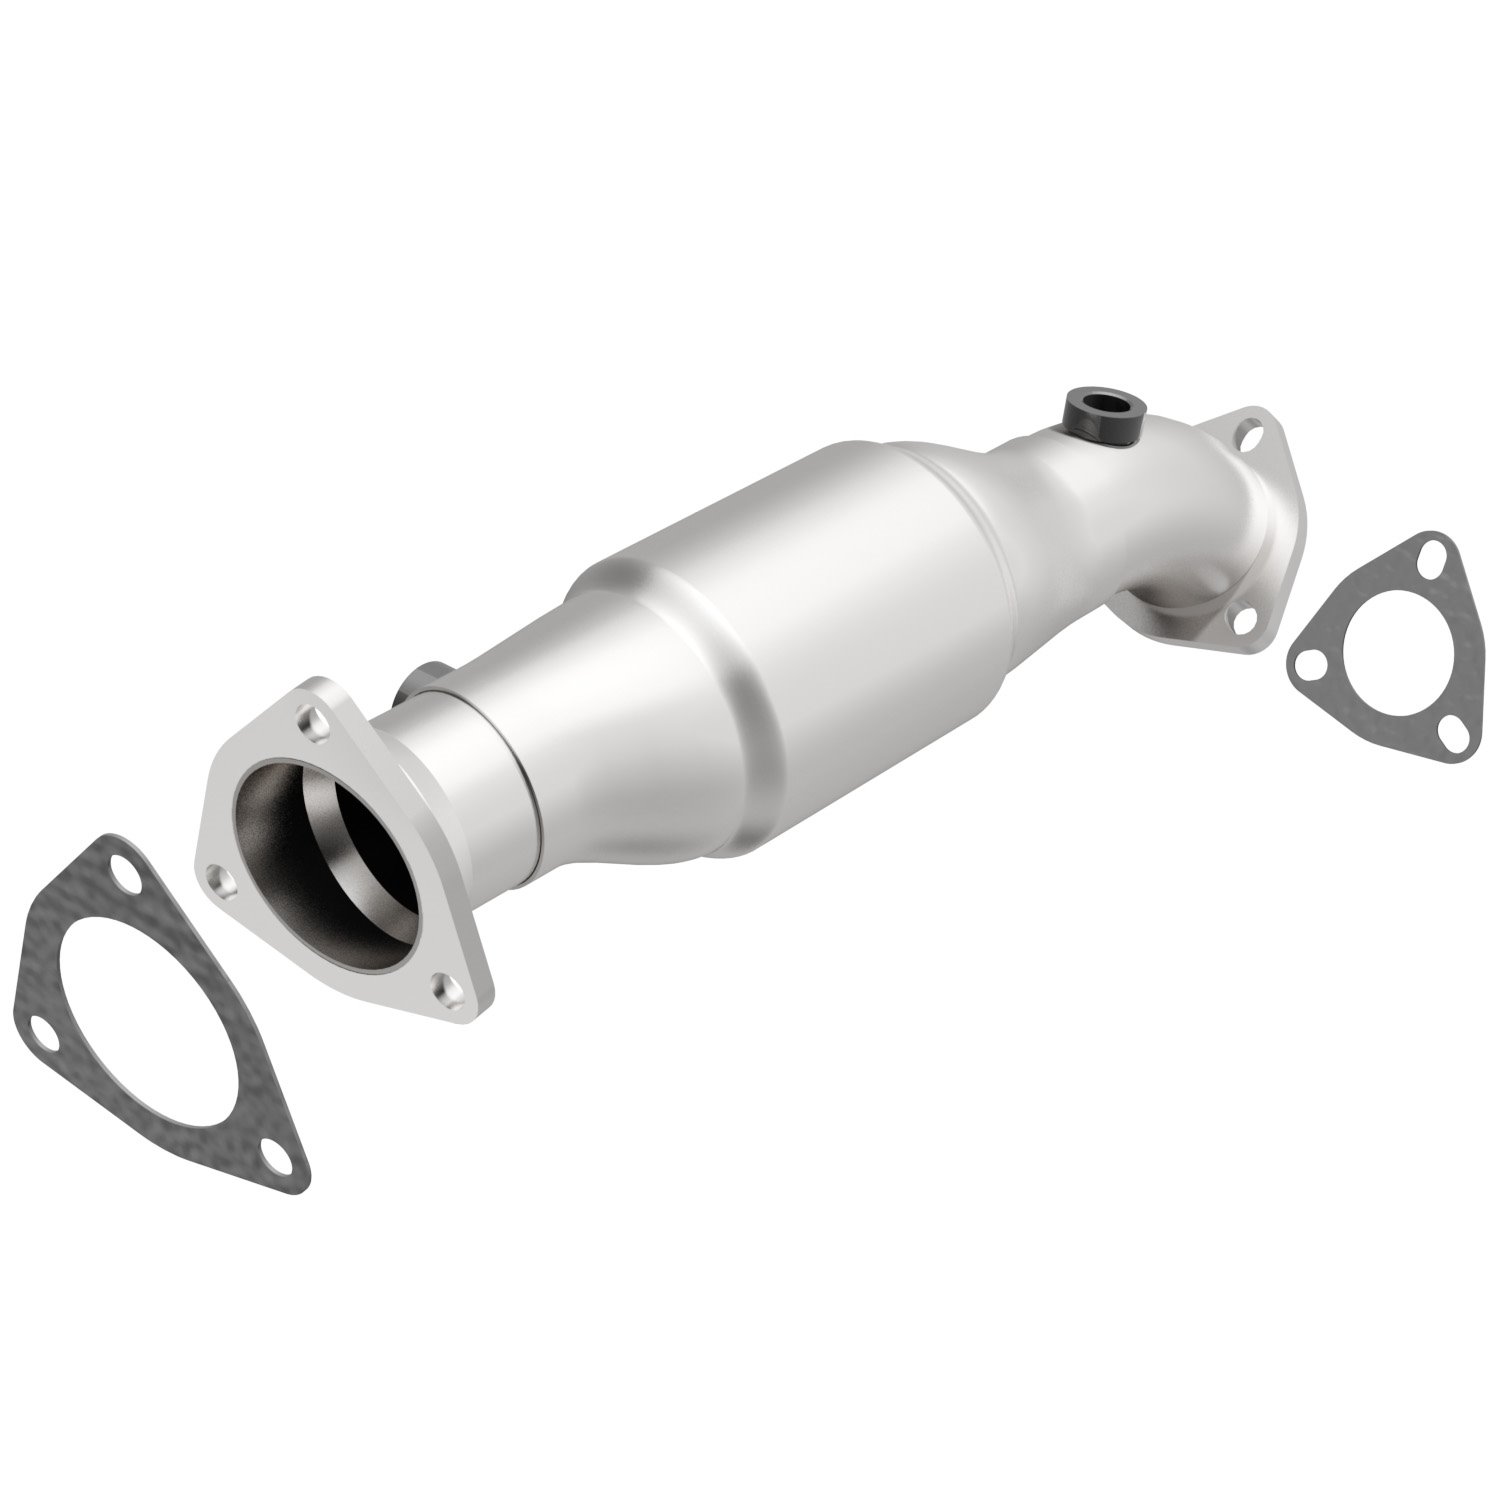 HM Grade Federal / EPA Compliant Direct-Fit Catalytic Converter 22960